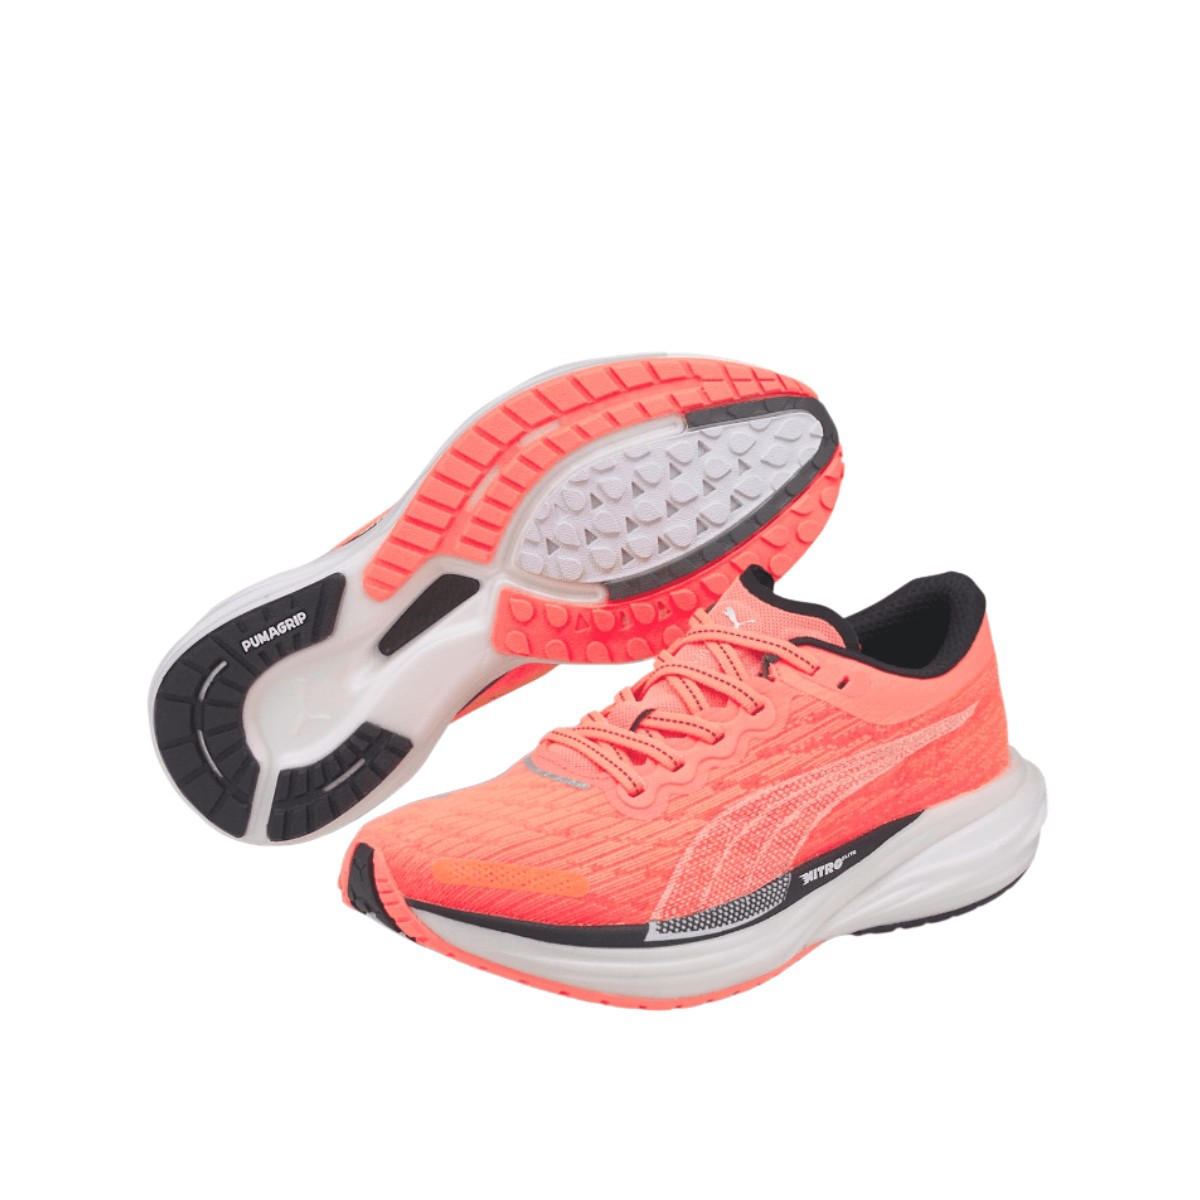 Buy the Puma Deviate NITRO 2 Pink White Woman at the Best Price